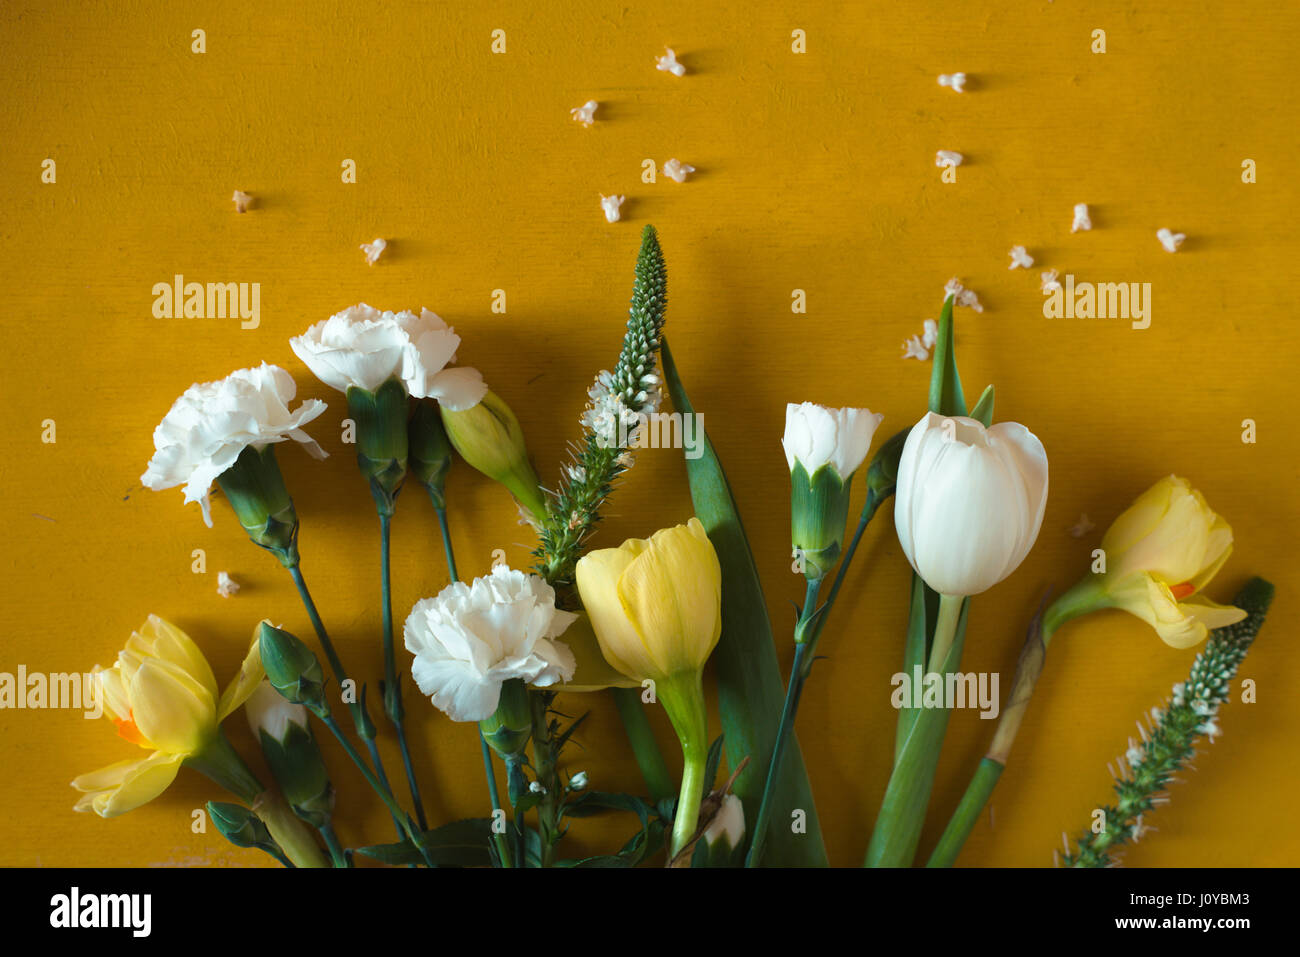 Tulips and carnations on a yellow table Stock Photo